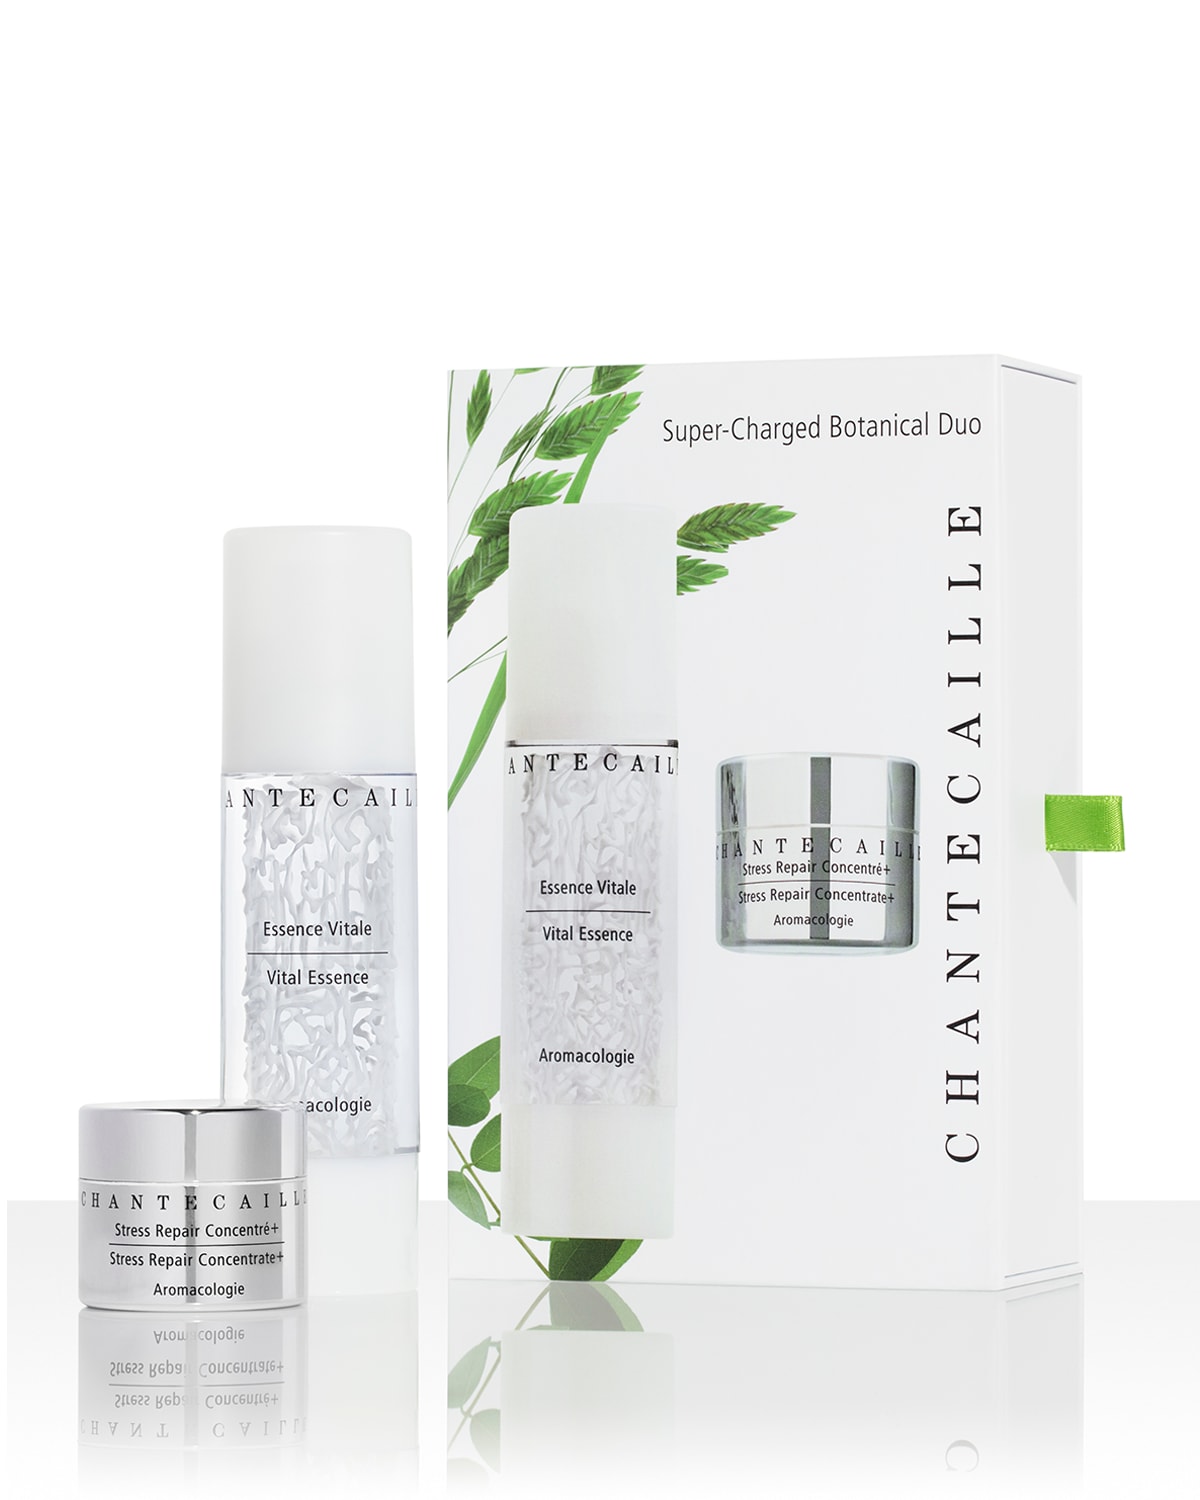 Super-Charged Botanical Duo Limited Edition ($313 Value)